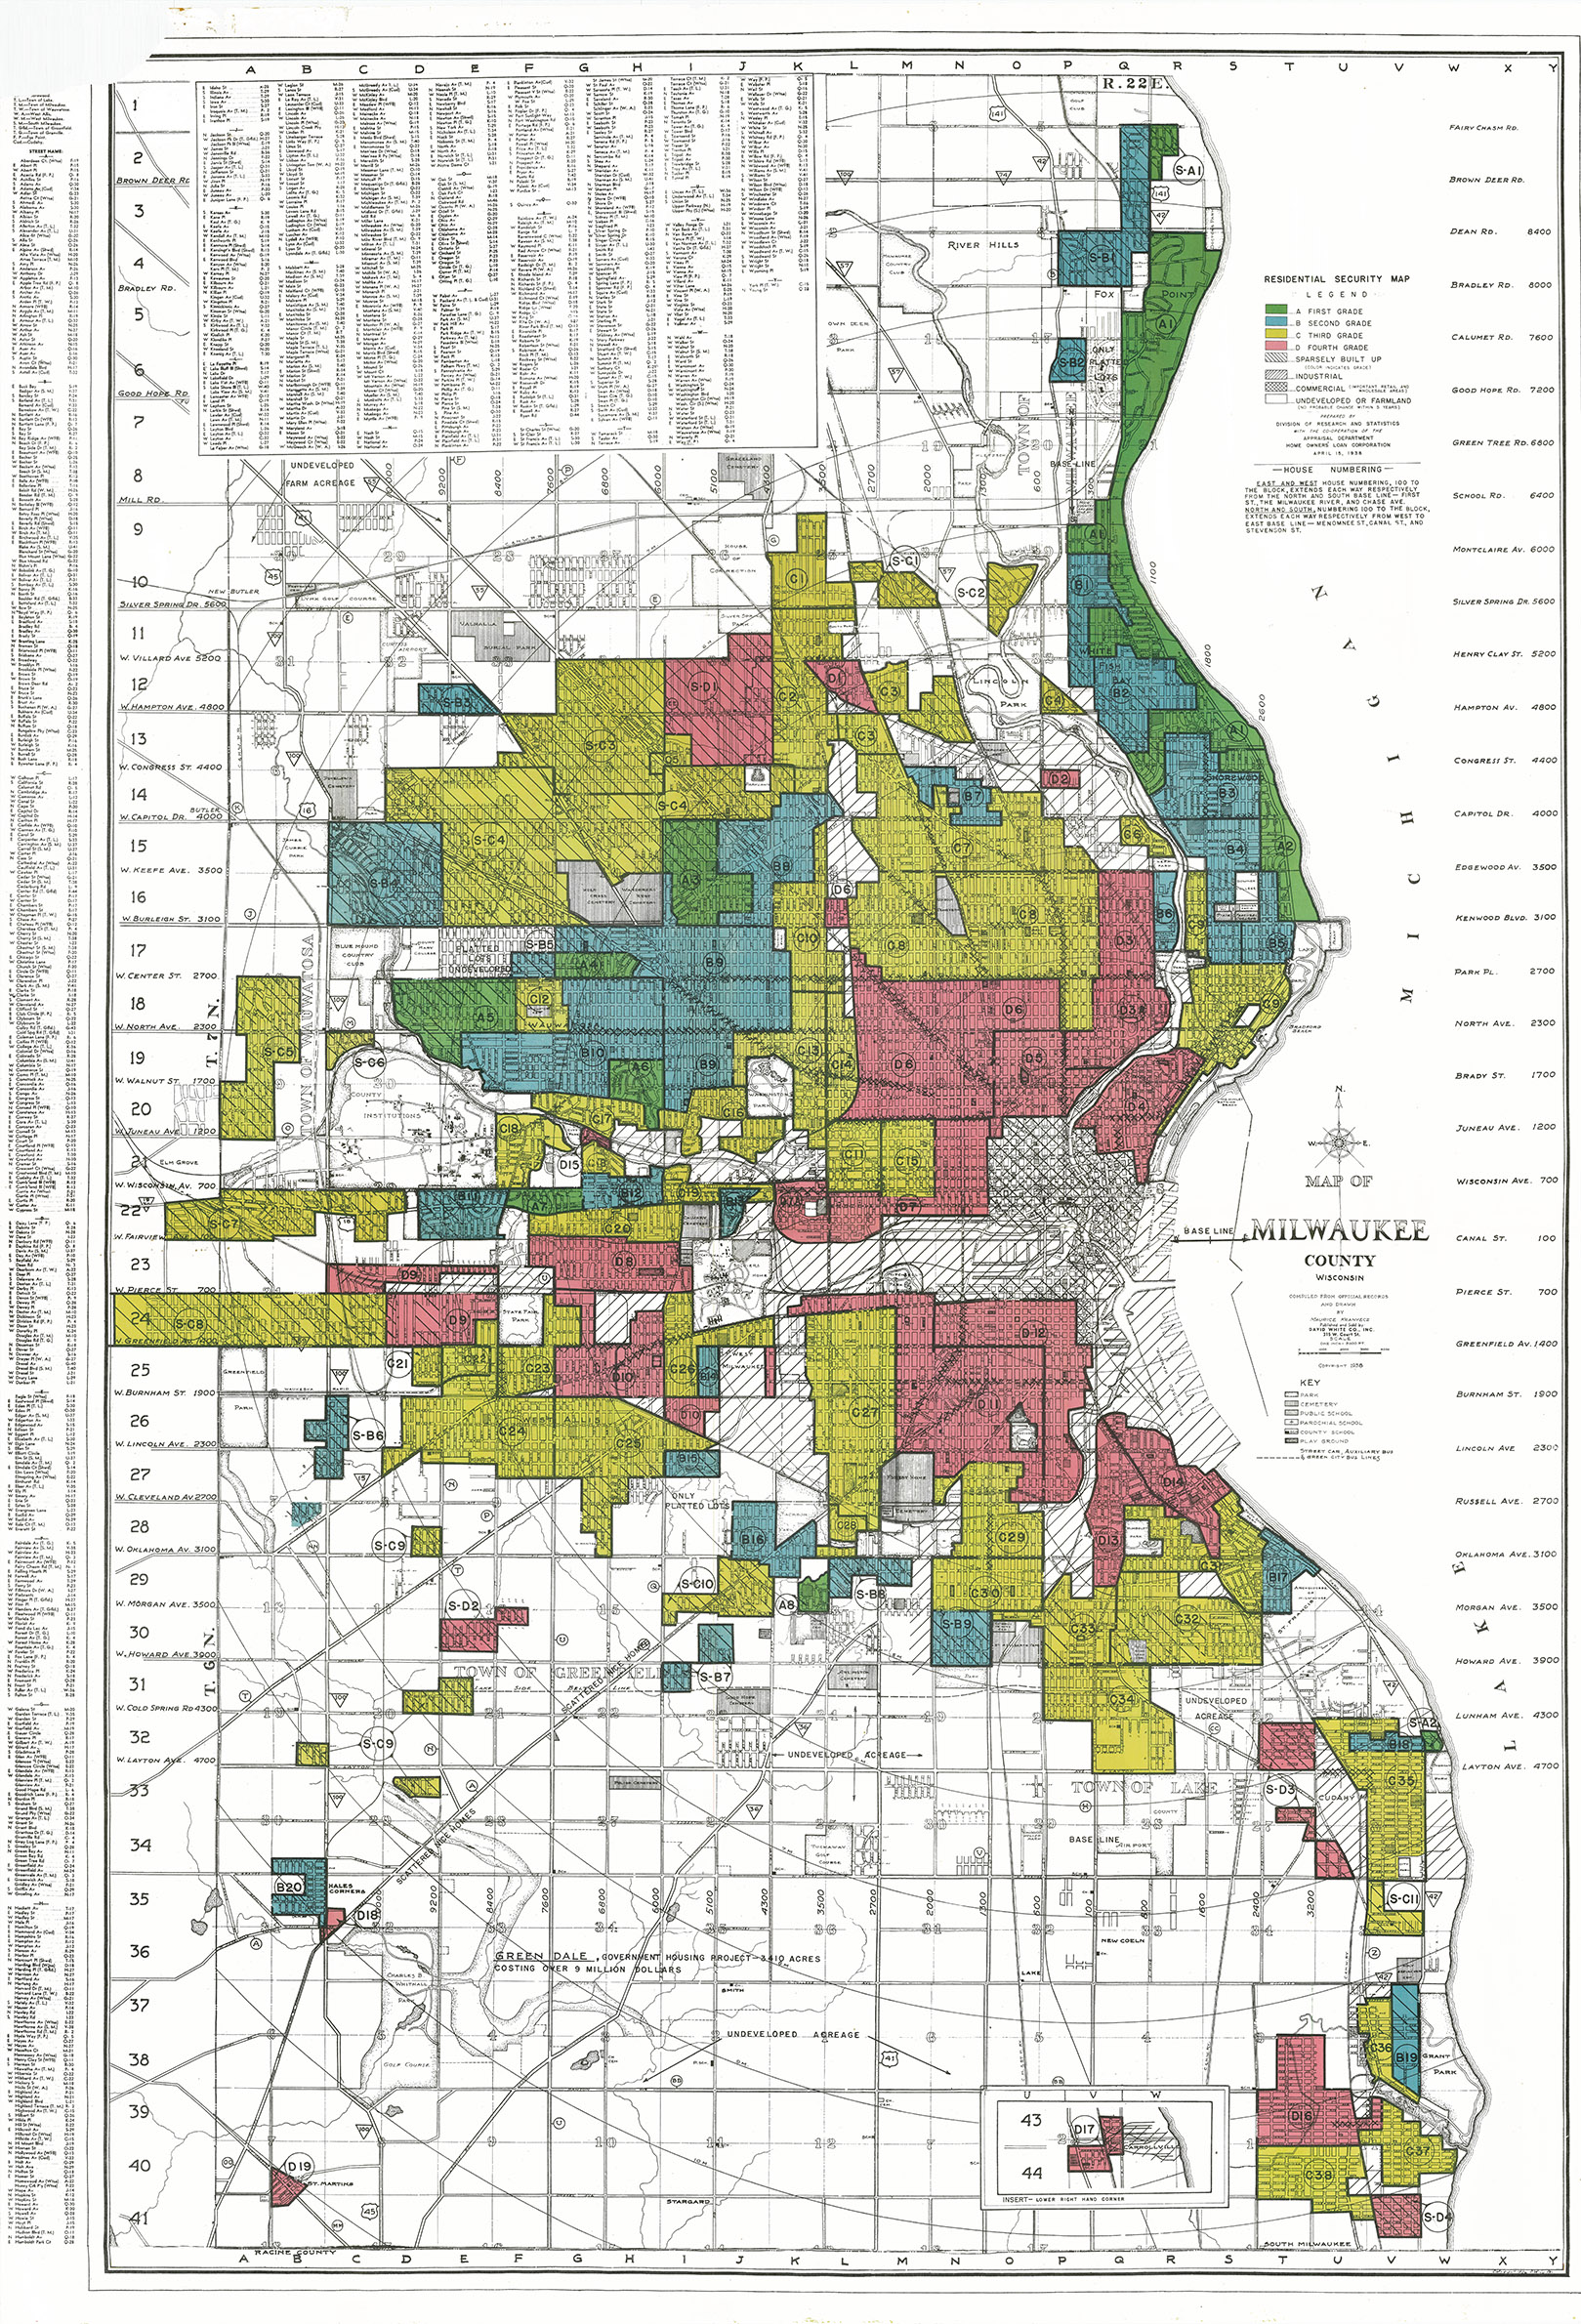 A 1938 redlining map of Milwaukee from the Home Owners' Loan Corporation